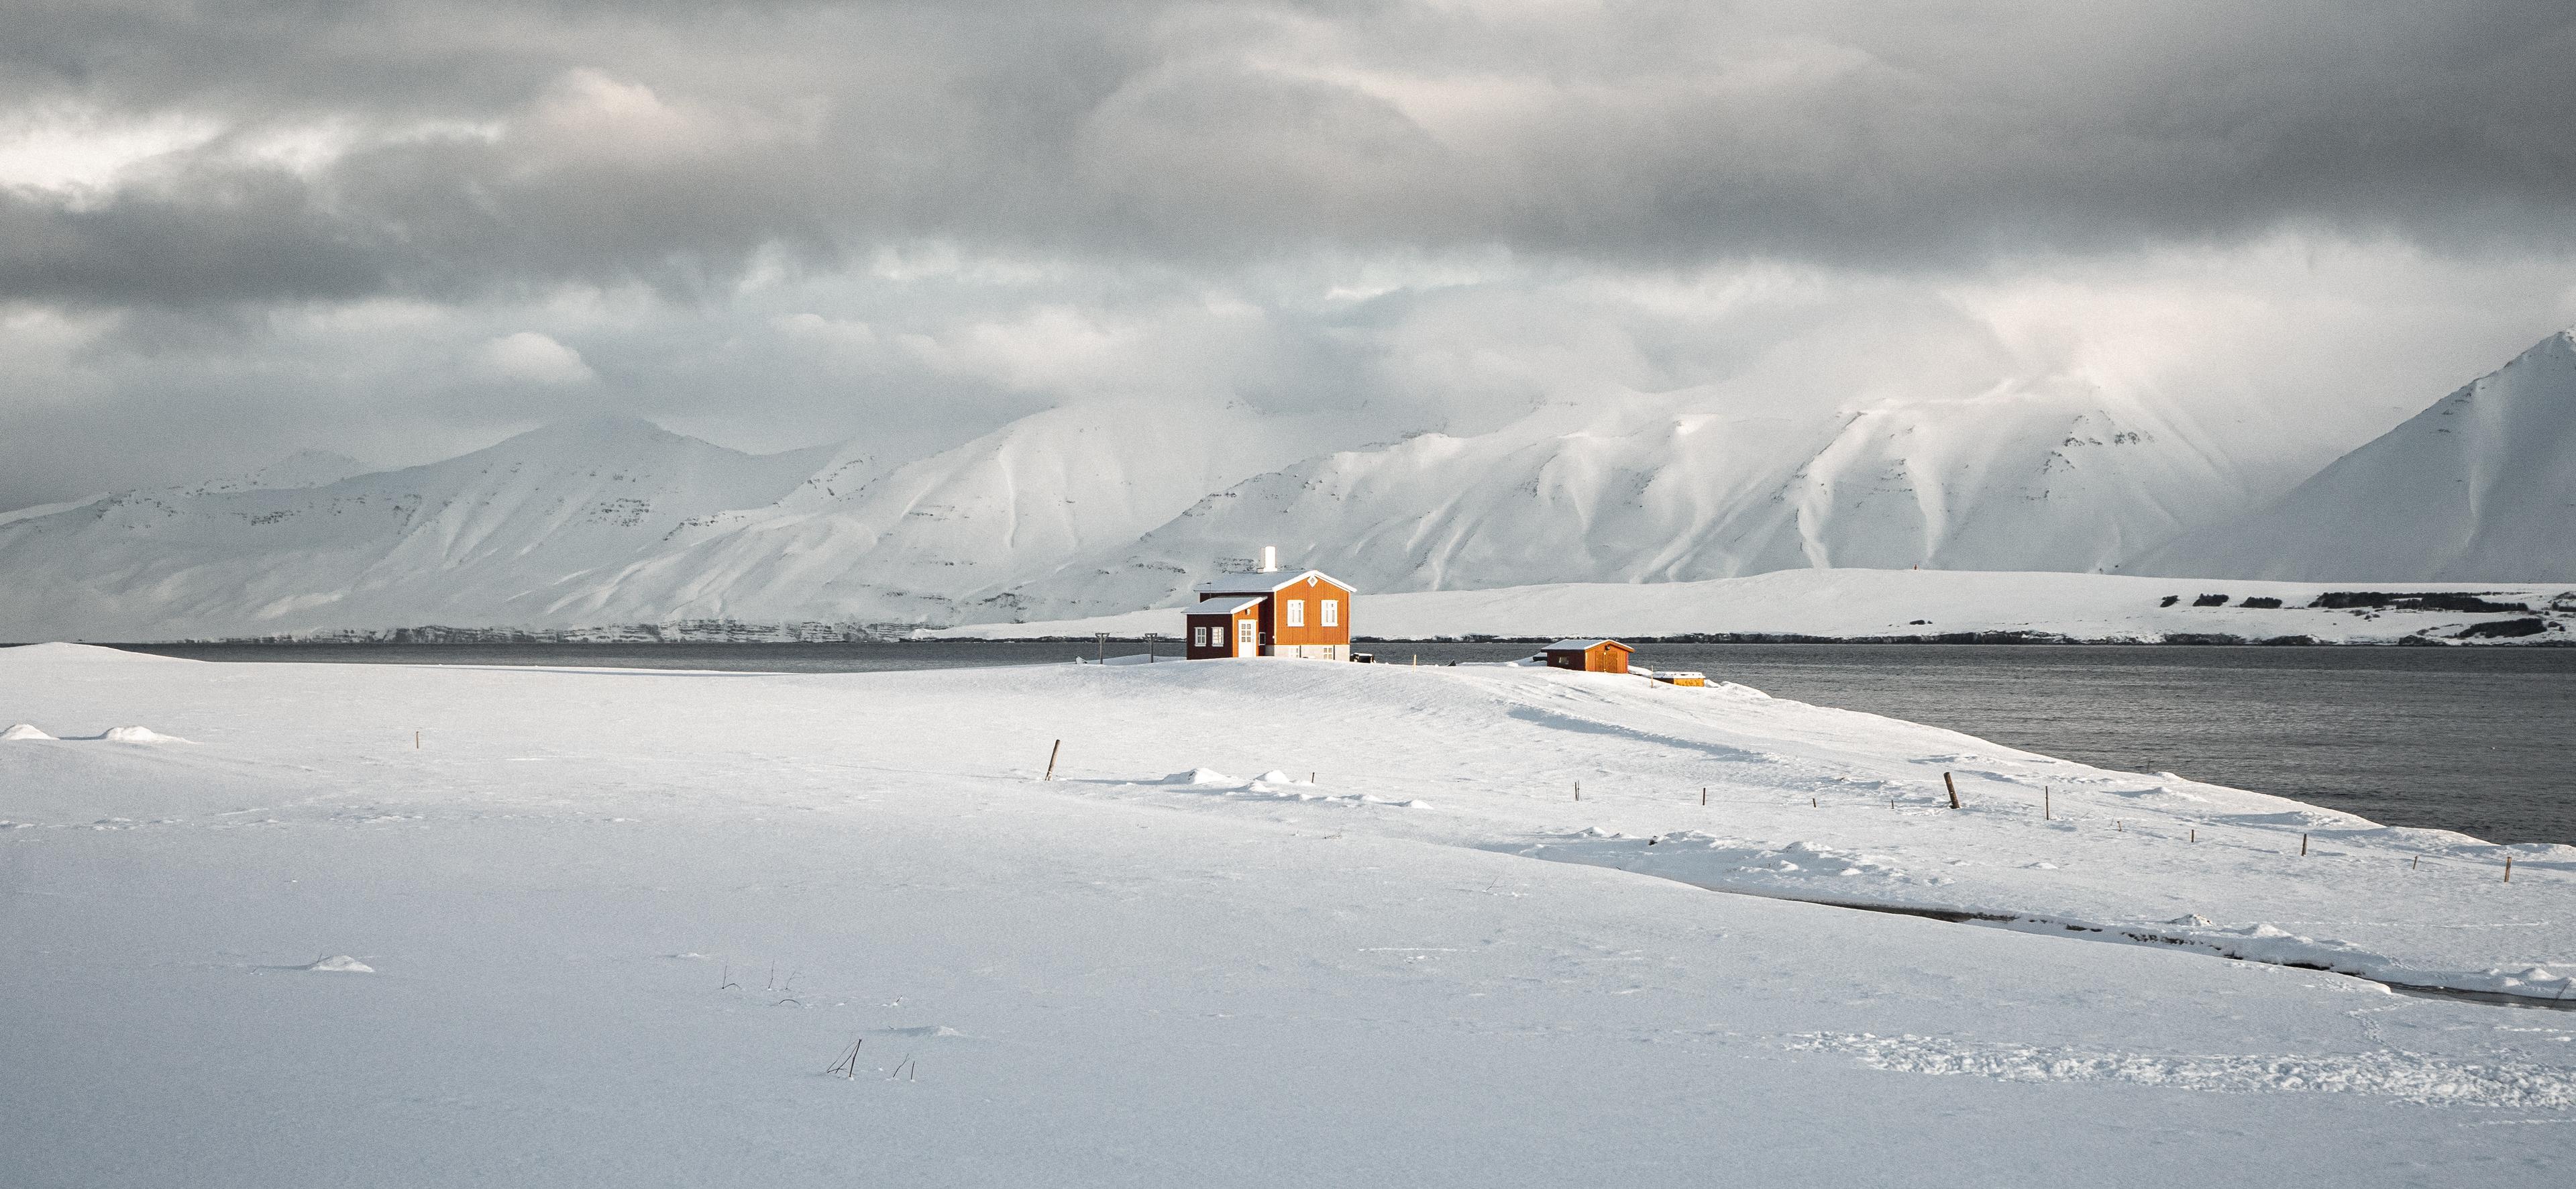 A small orange house stands out against a vast snowy landscape with a backdrop of snow-covered mountains under a cloudy sky.